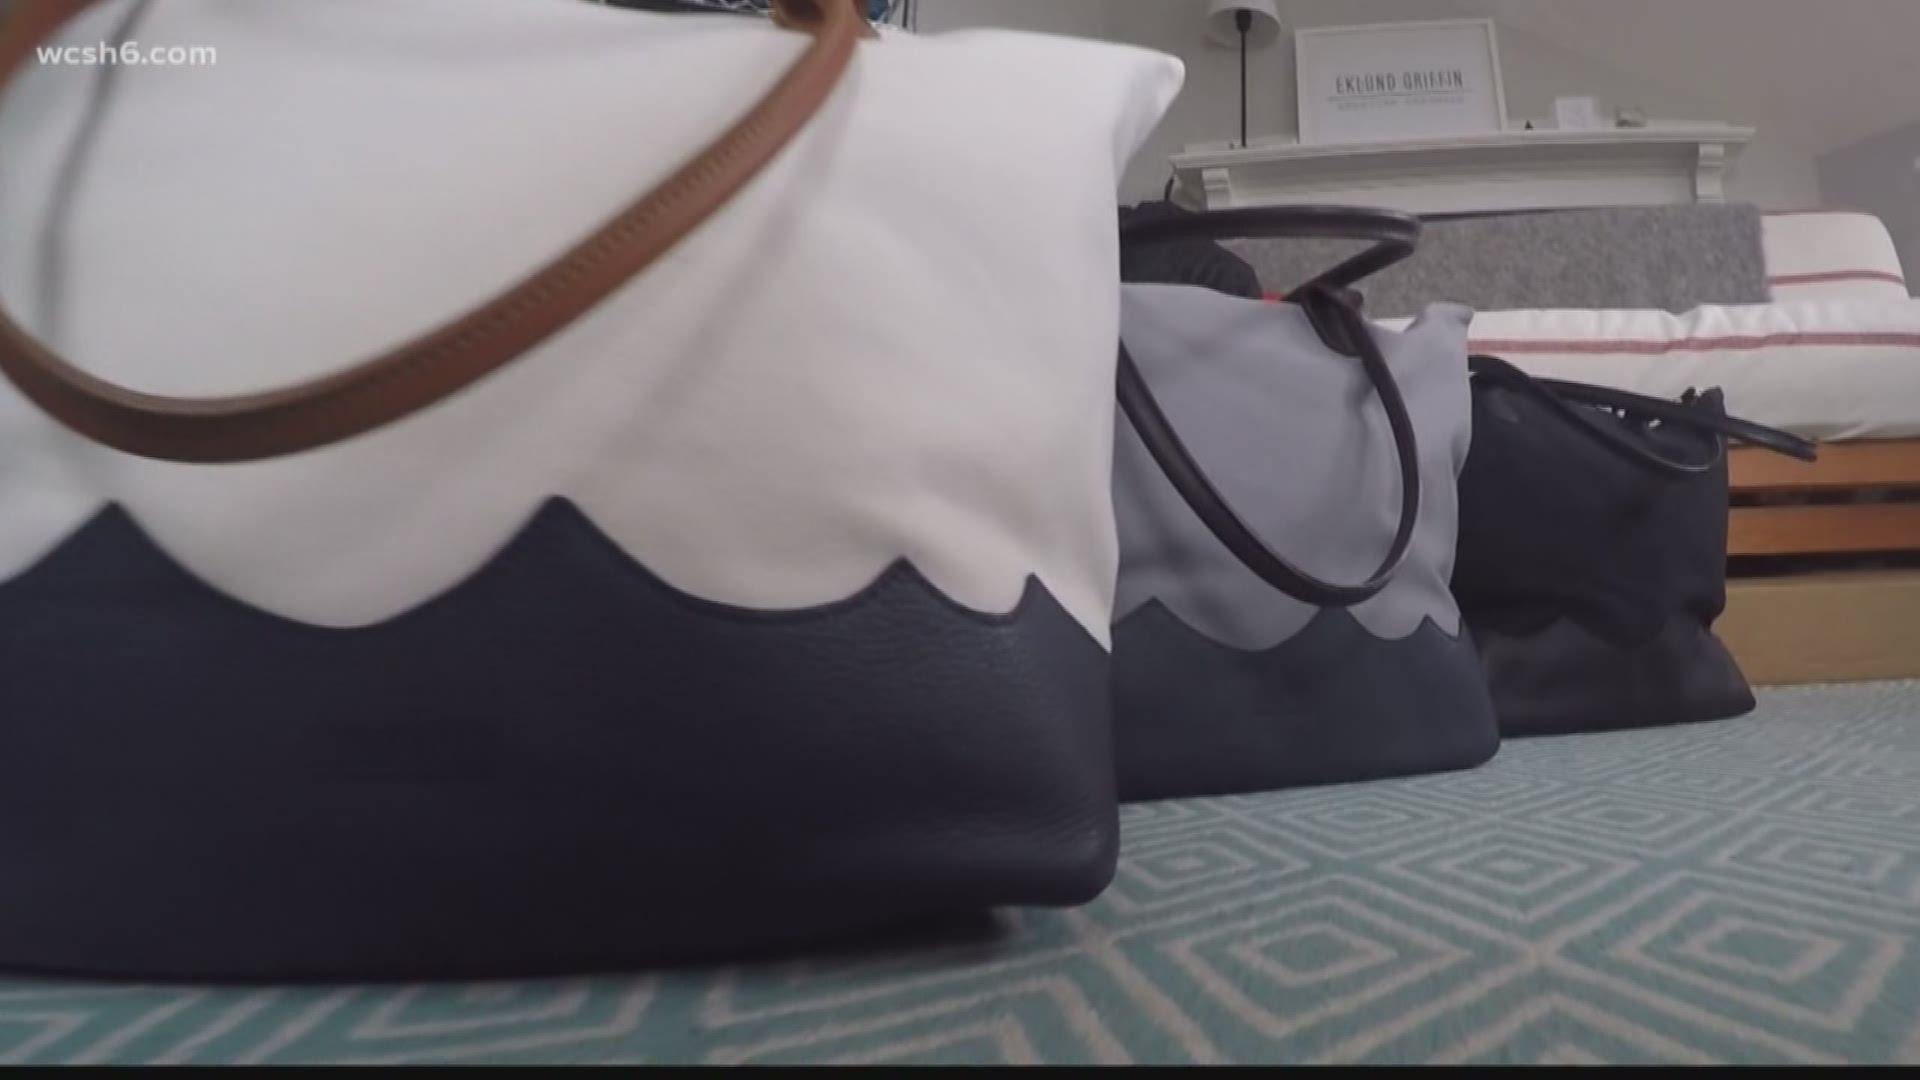 Sisters Run Handmade Bag Business From Home In Cape Elizabeth